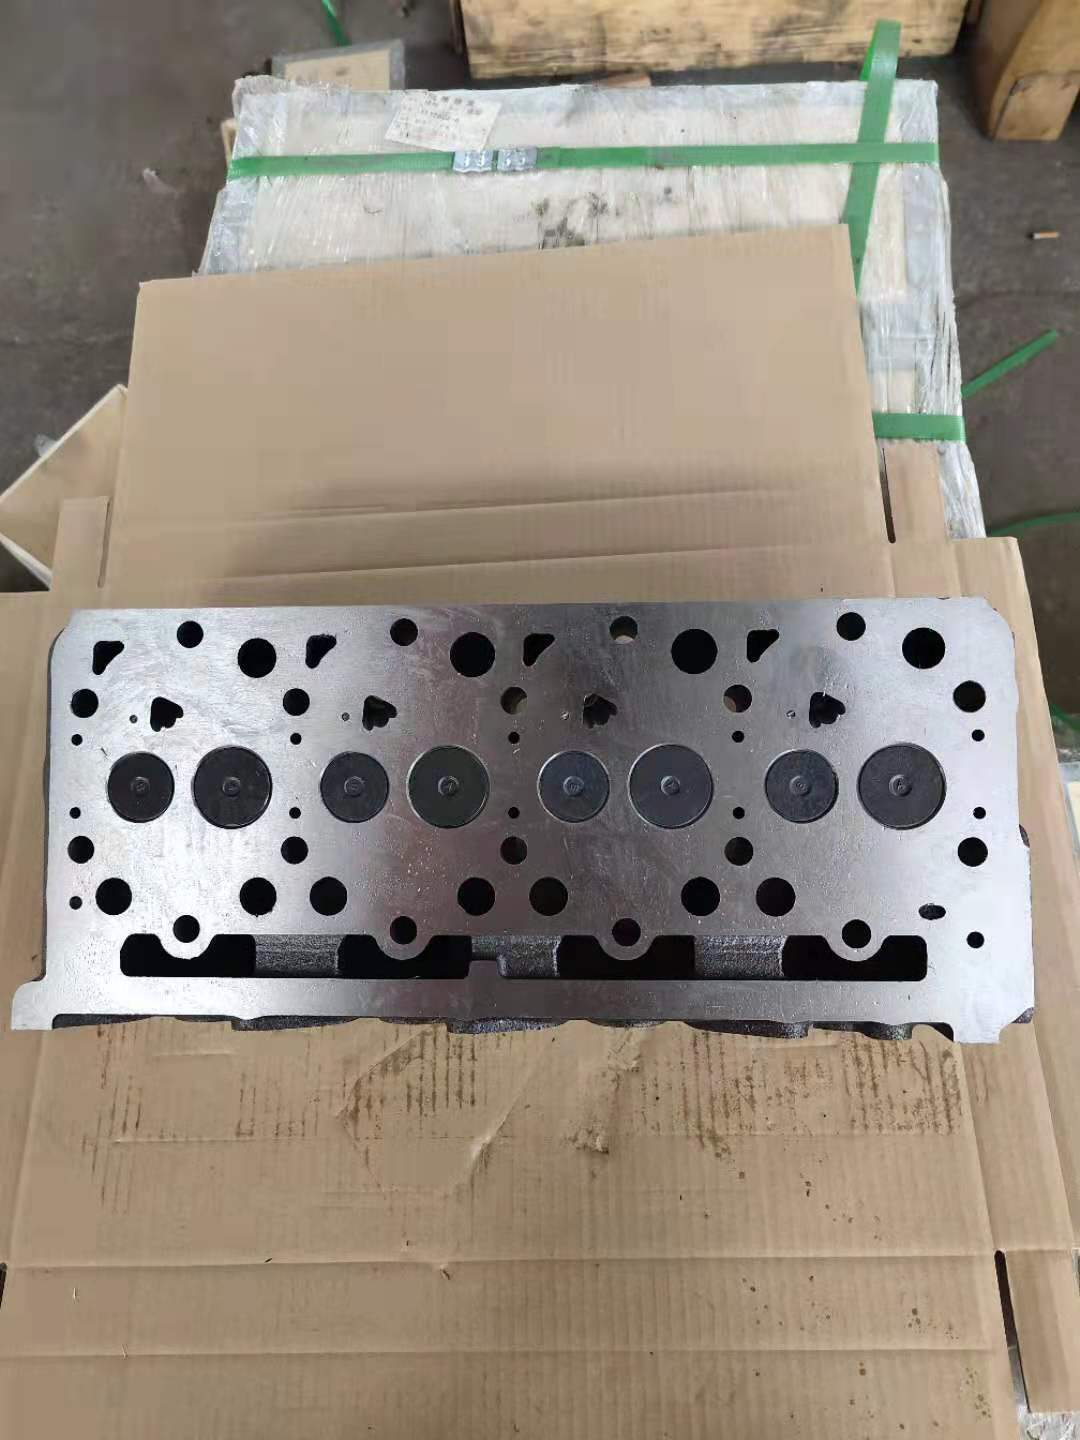 New V2203 Complete Cylinder Head With Valves For Bobcat 334 331 773 B300 S175 S150 S185 S130 763 7753 753 Engine - KUDUPARTS